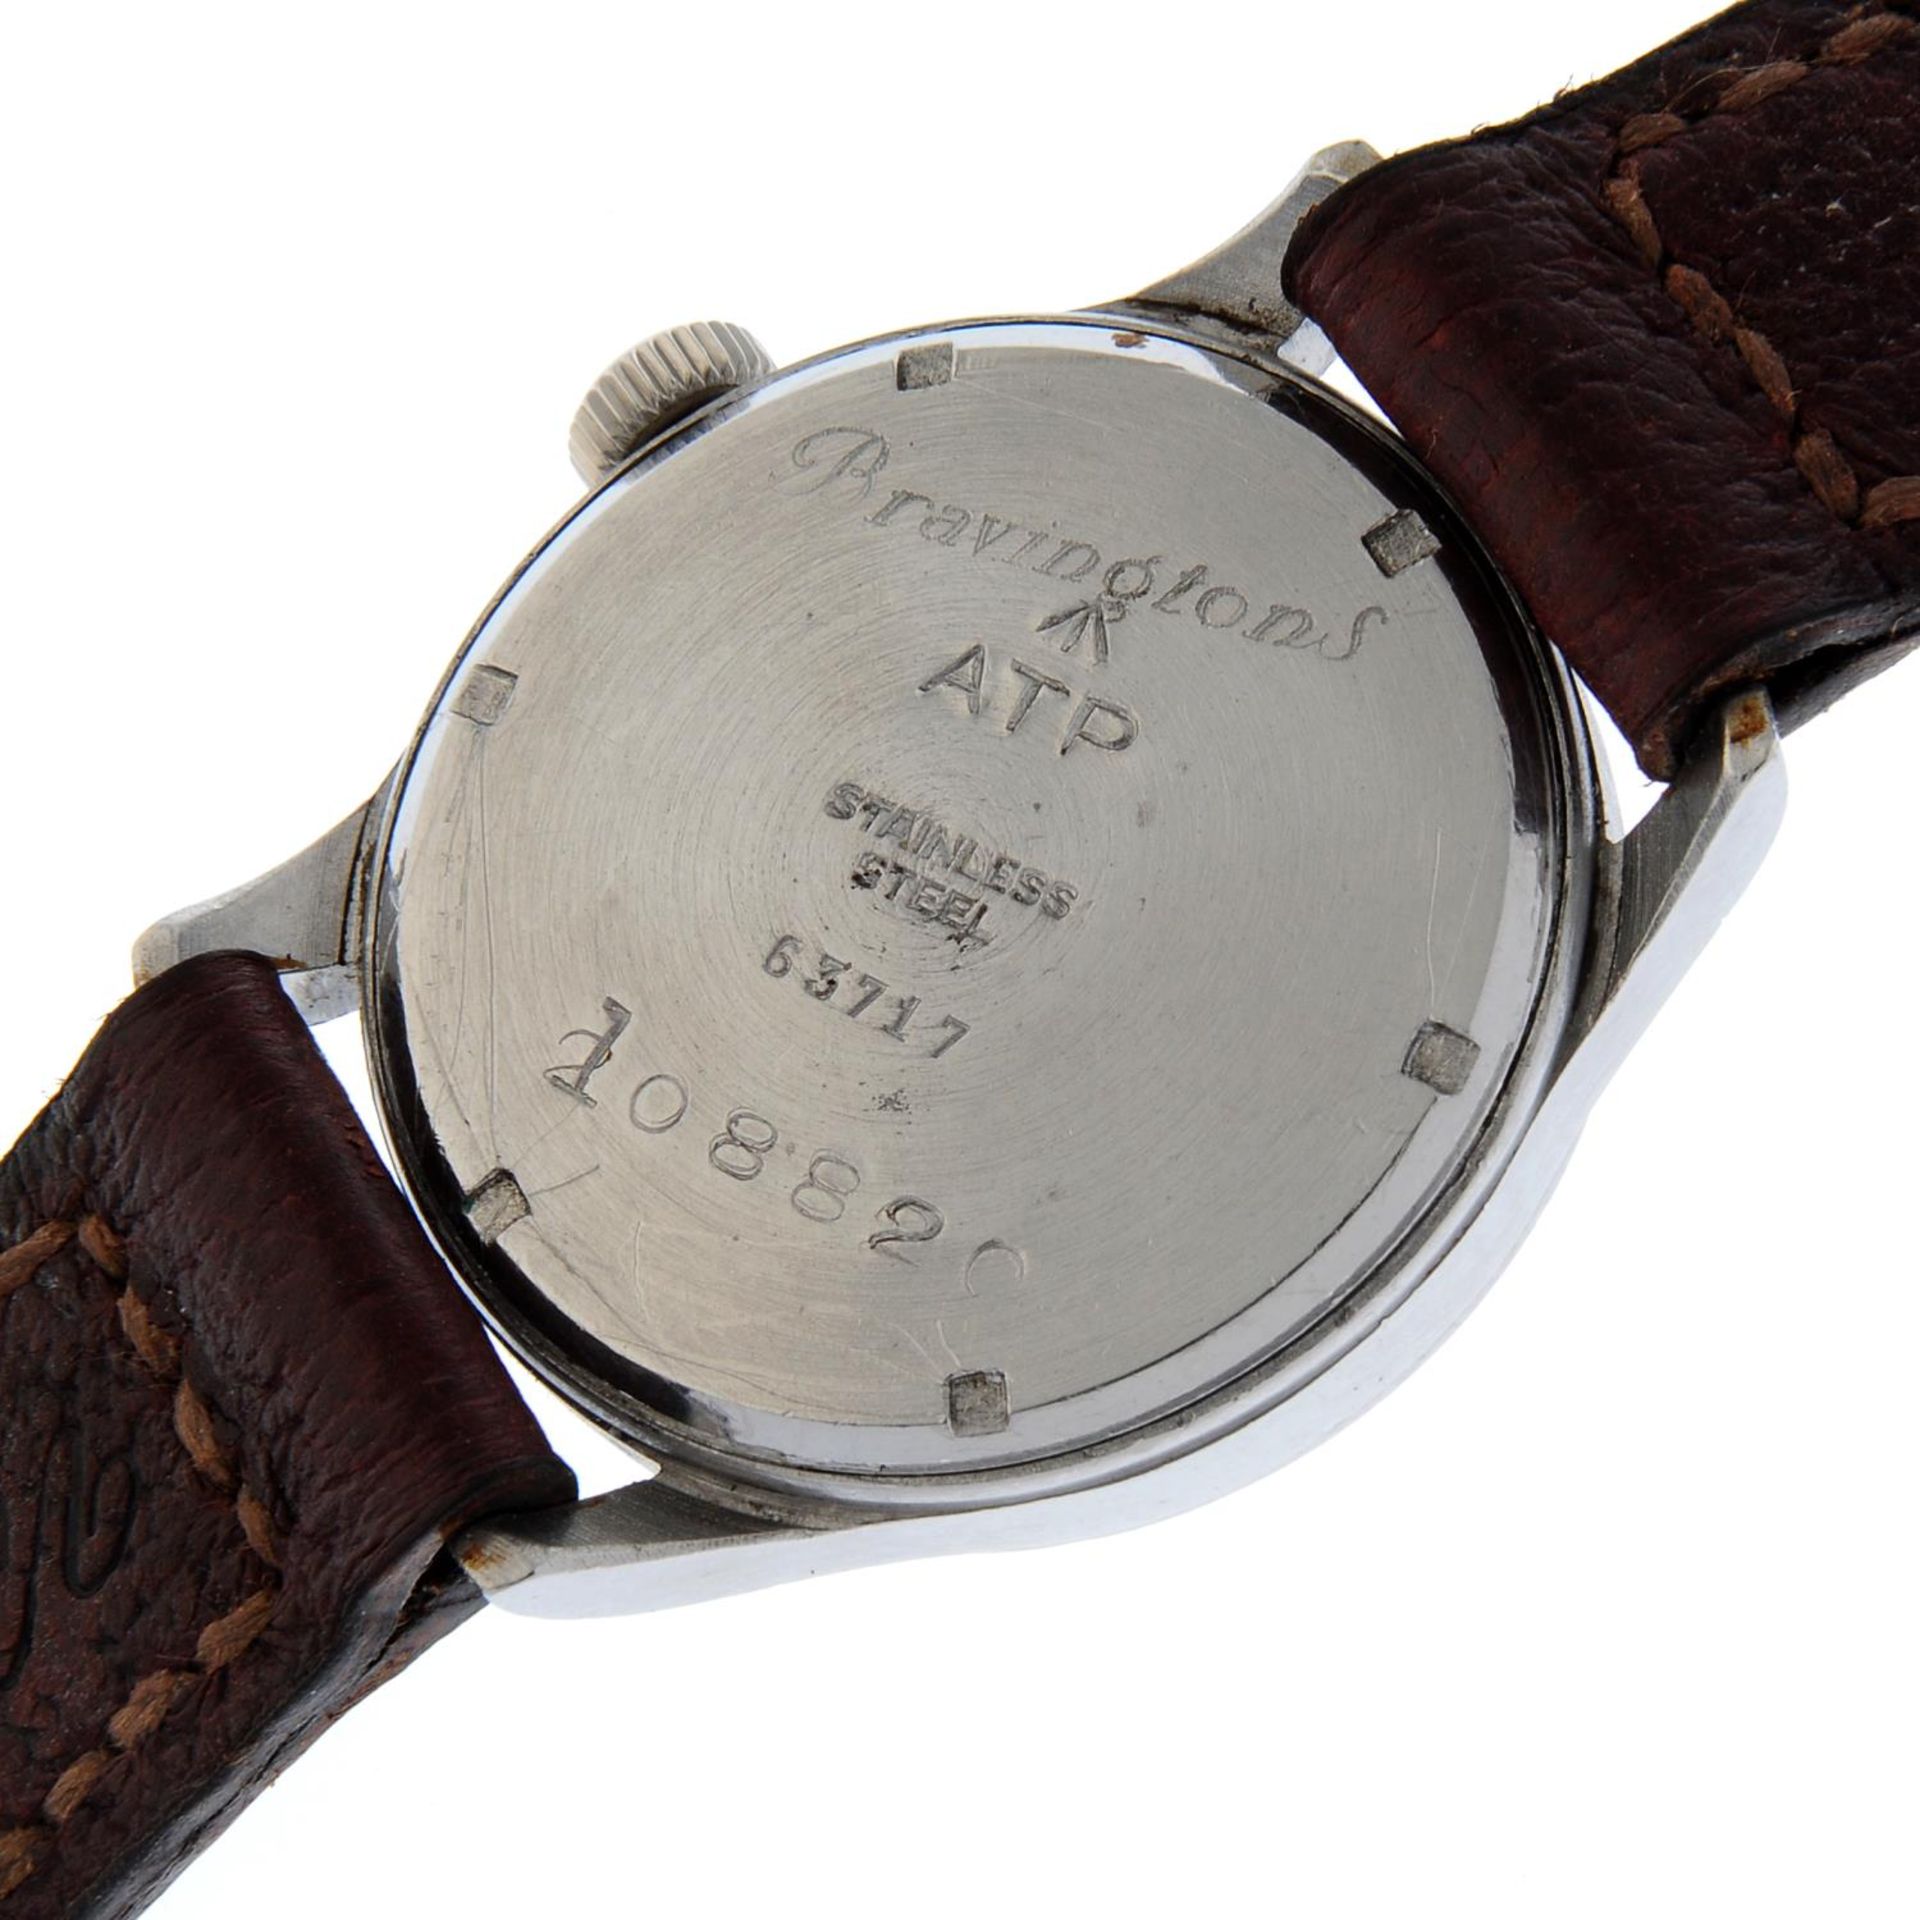 UNITAS - a military issue wrist watch. - Image 4 of 4